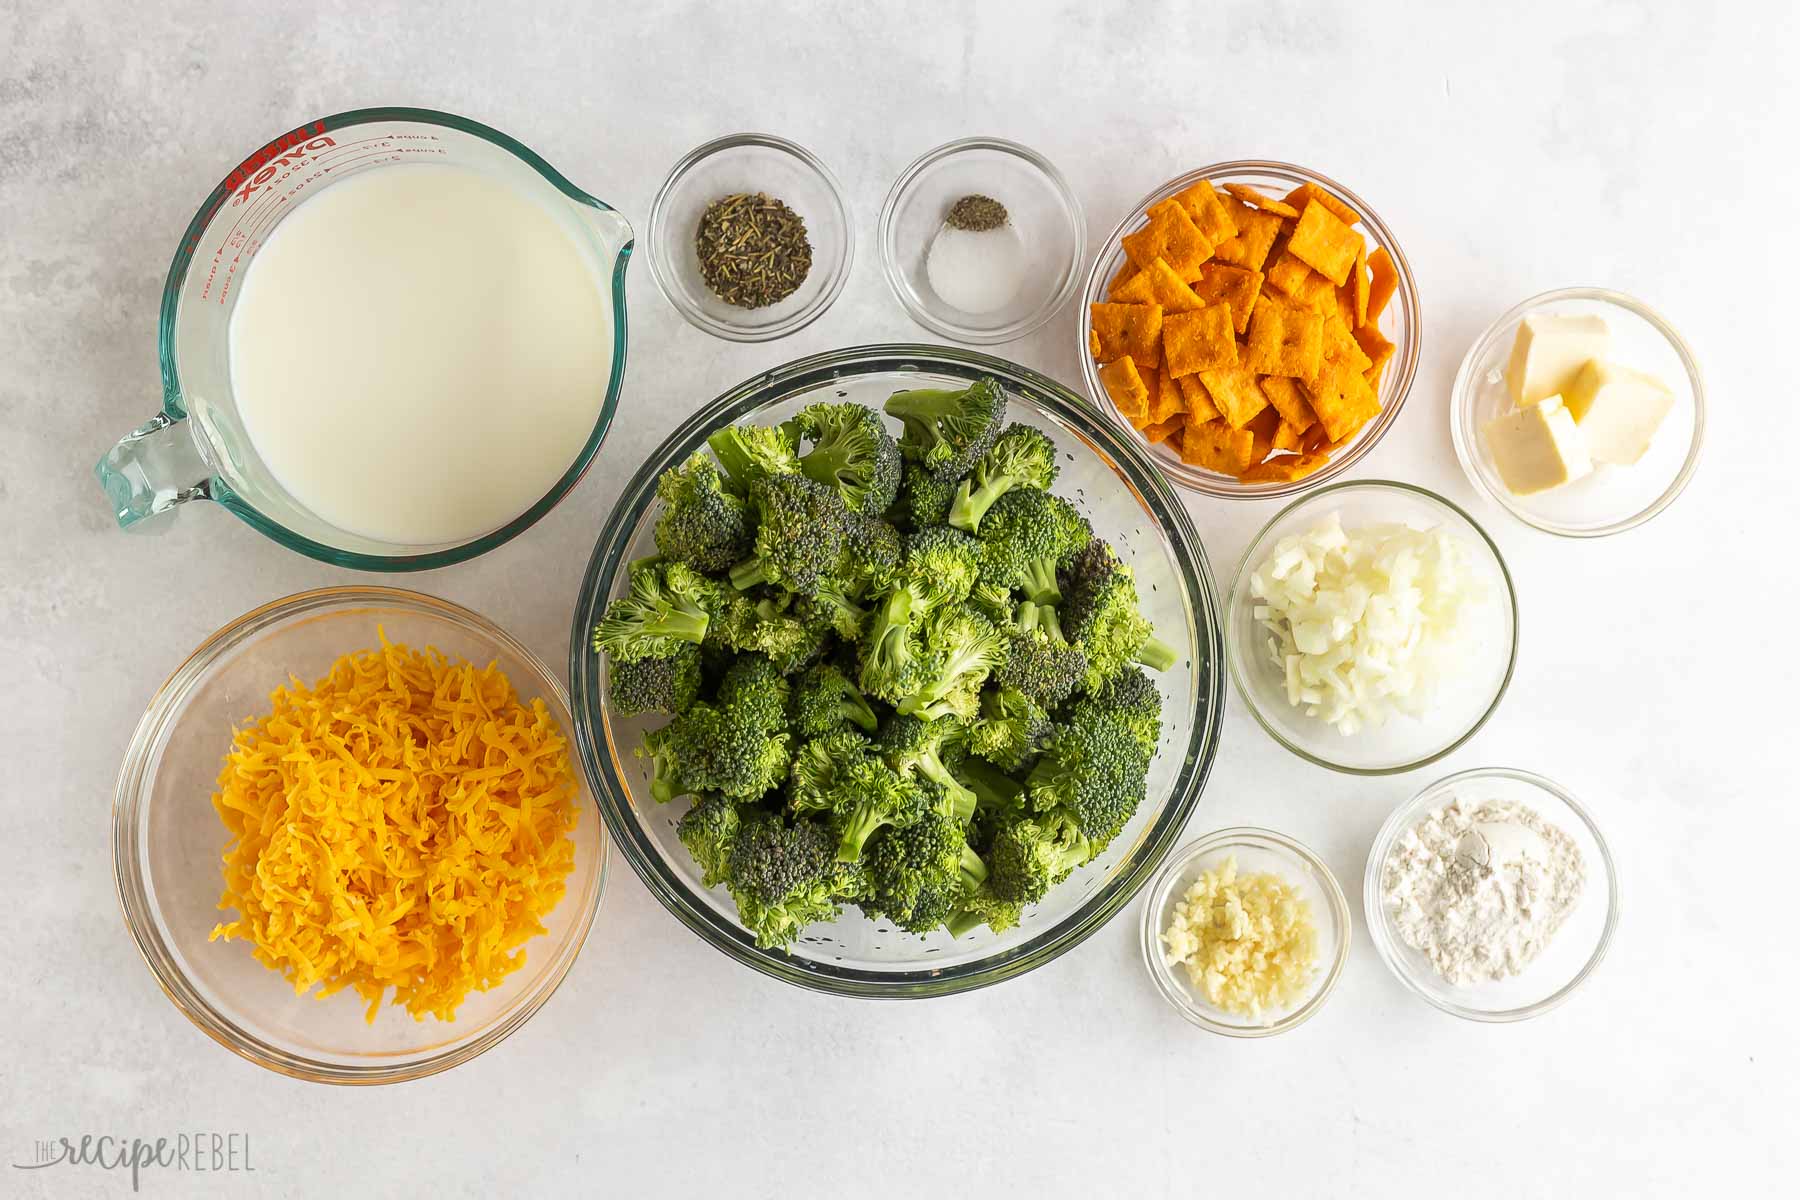 ingredients for broccoli casserole on a white background.